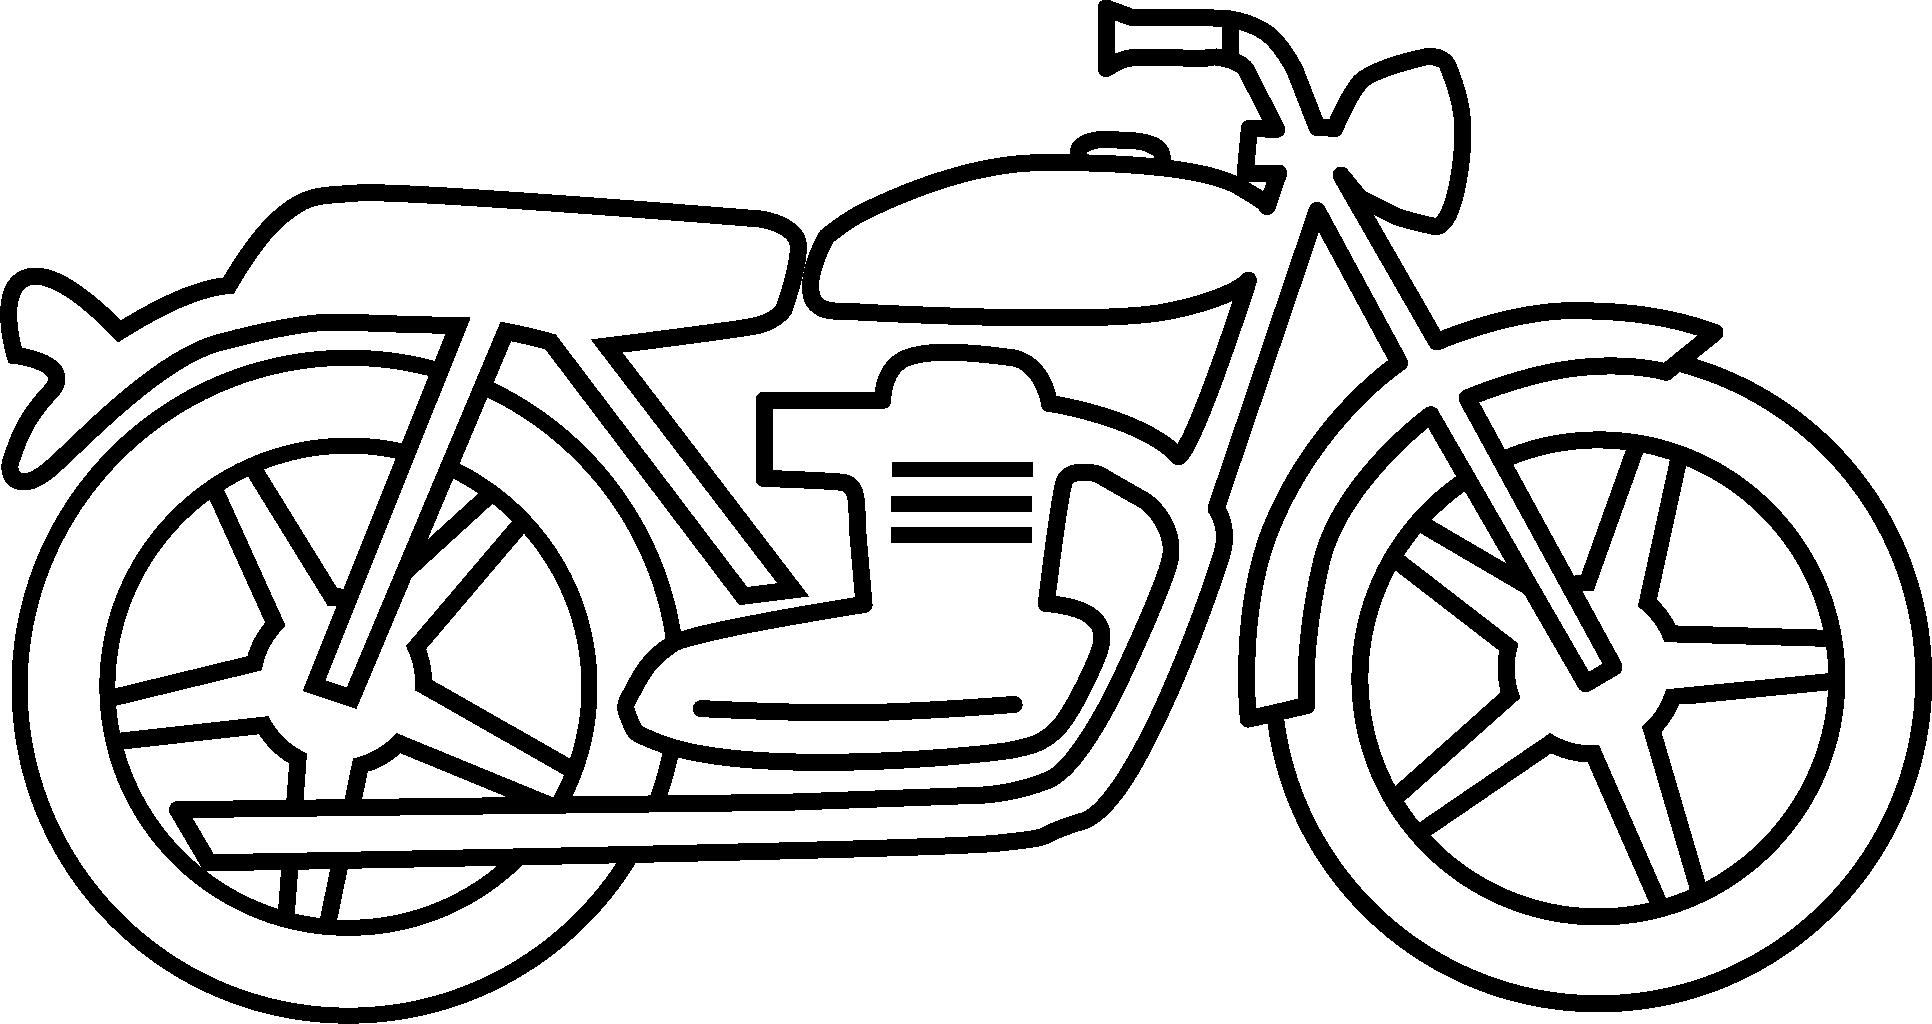 Motorcycle Clipart Black And White Simple.